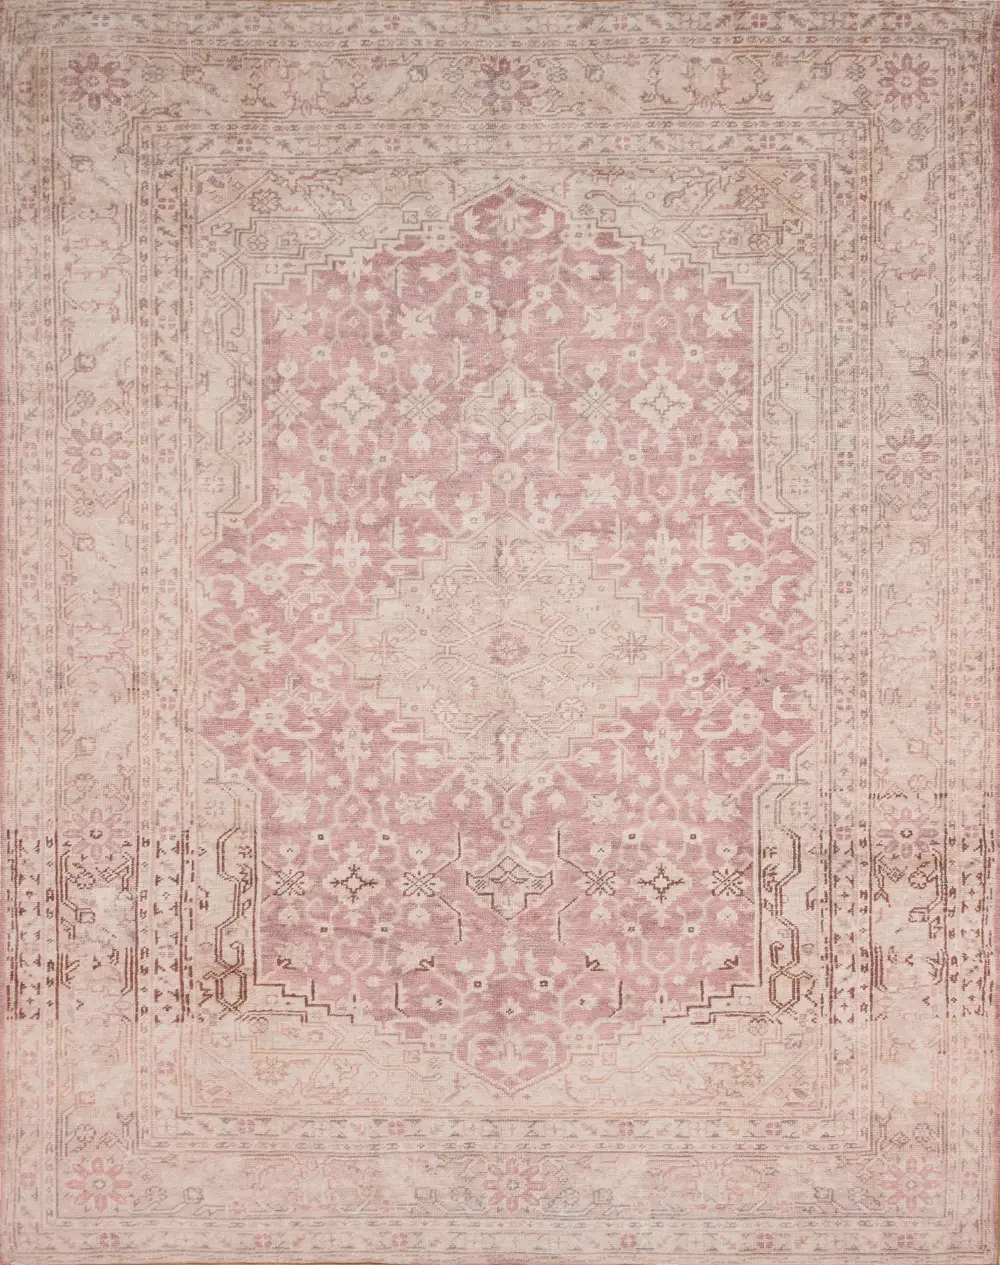 LF-015X7.6 5 x 8 Medium Terracotta and Ivory Area Rug - Lucca-1